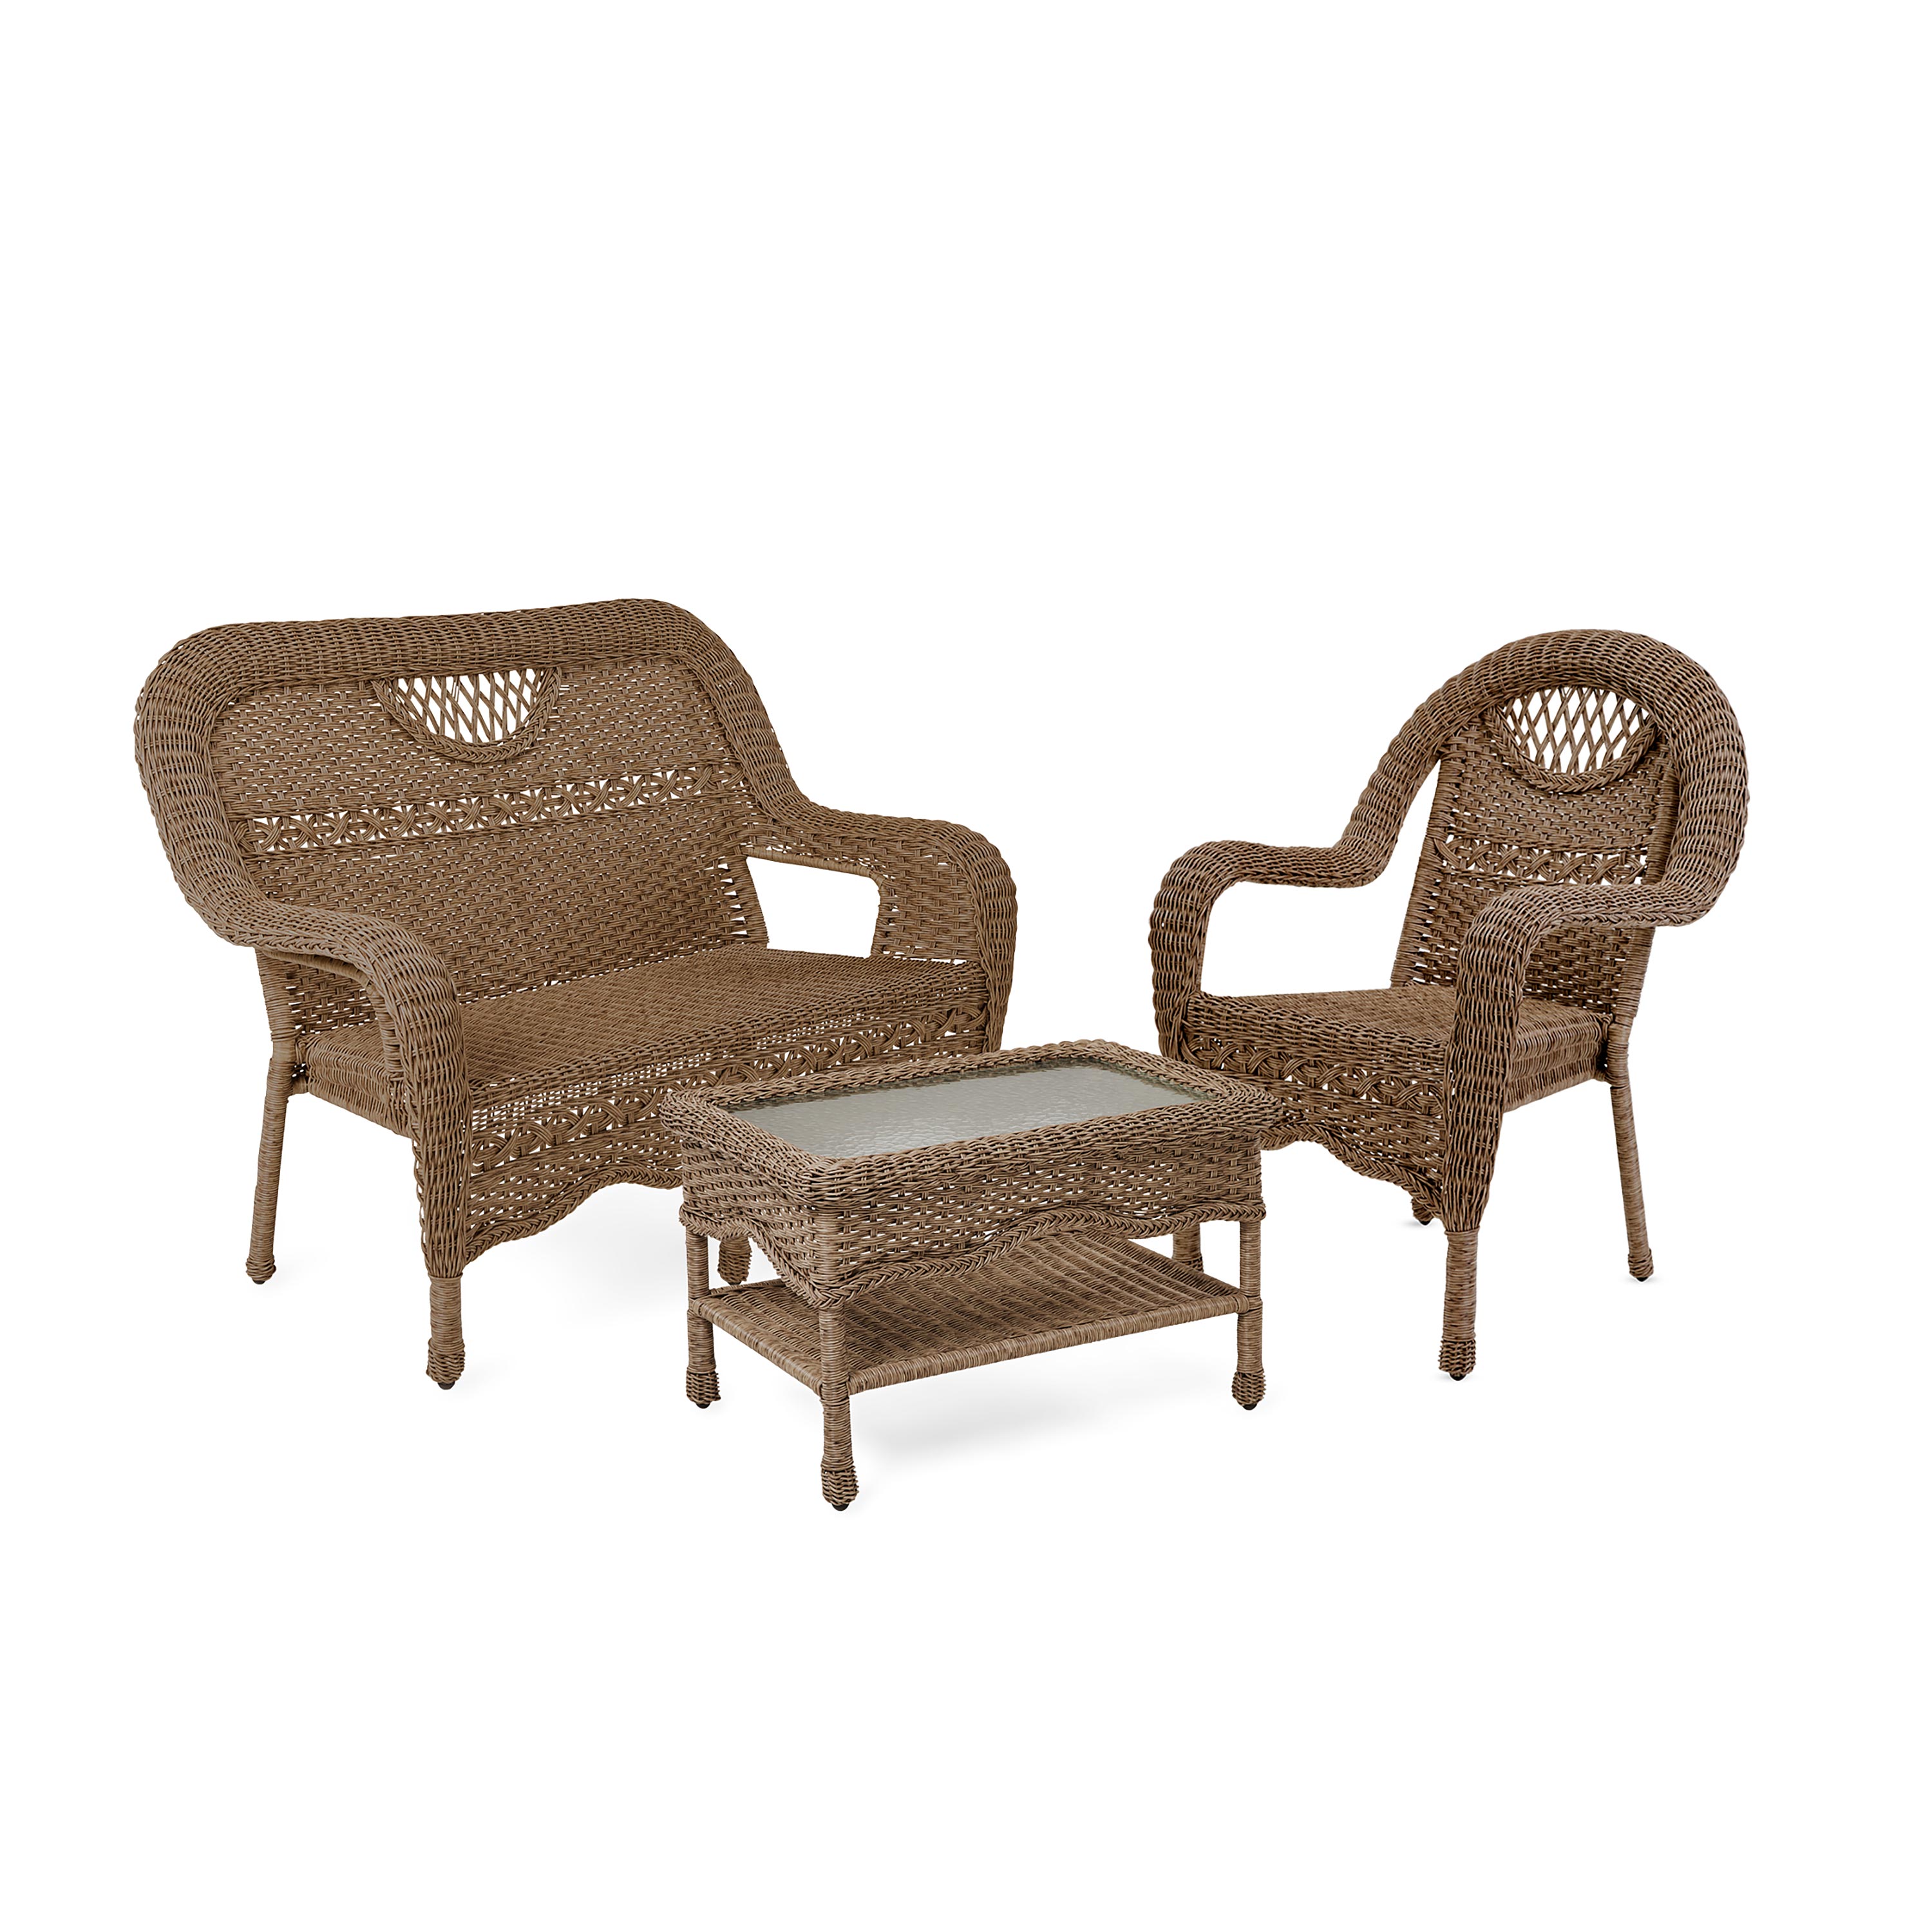 Prospect Hill Wicker Settee, Chair and Coffee Table Set